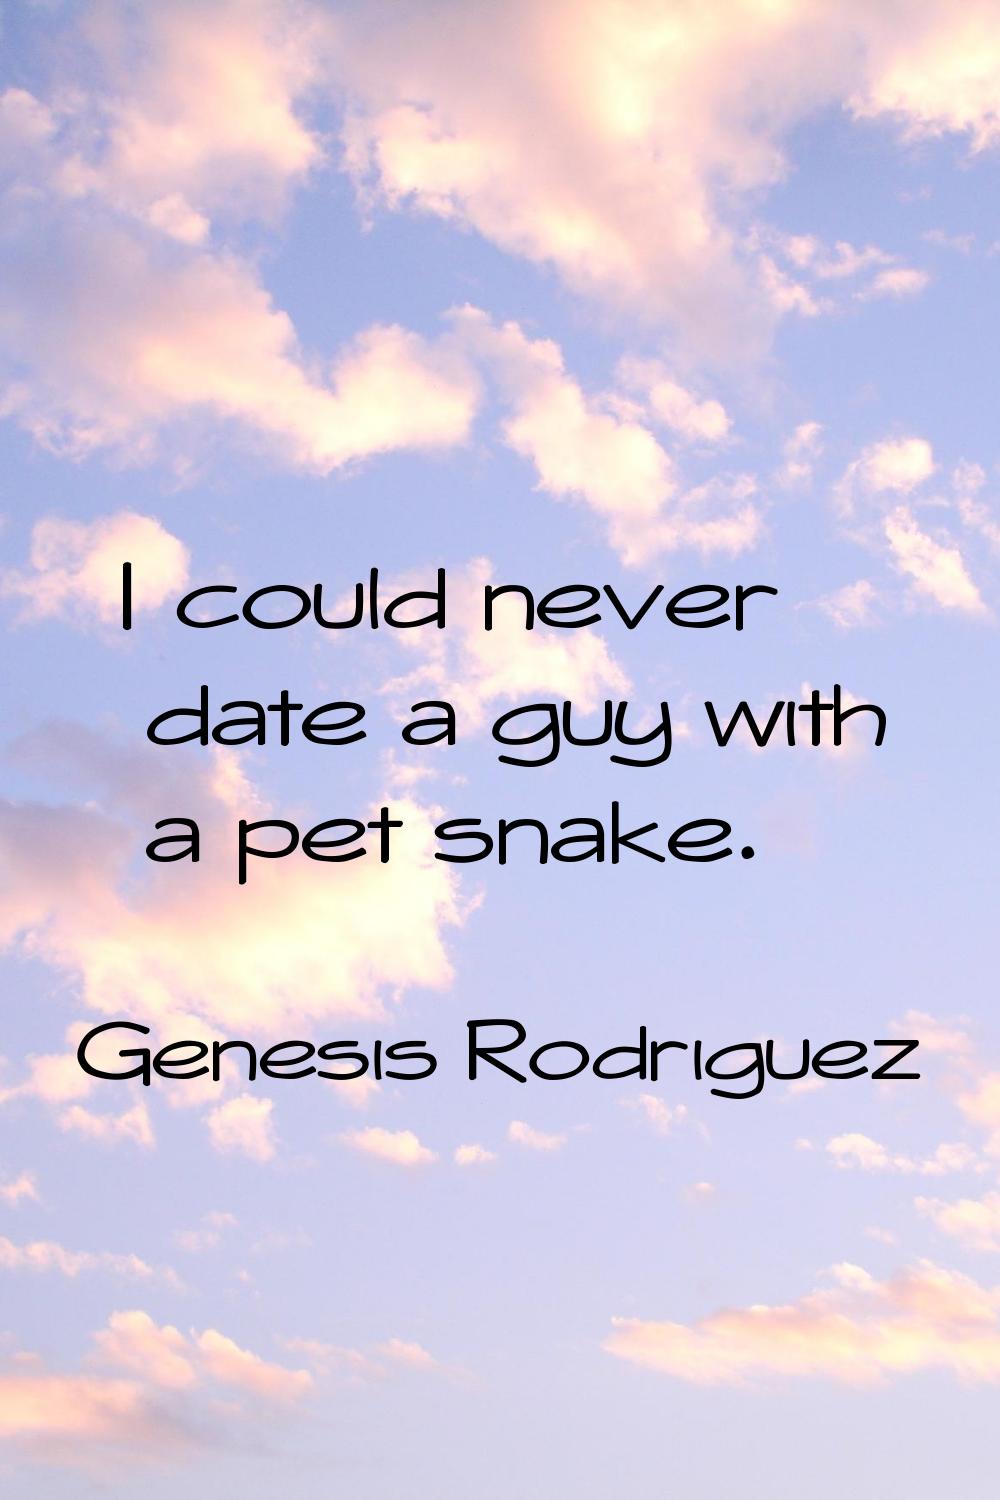 I could never date a guy with a pet snake.